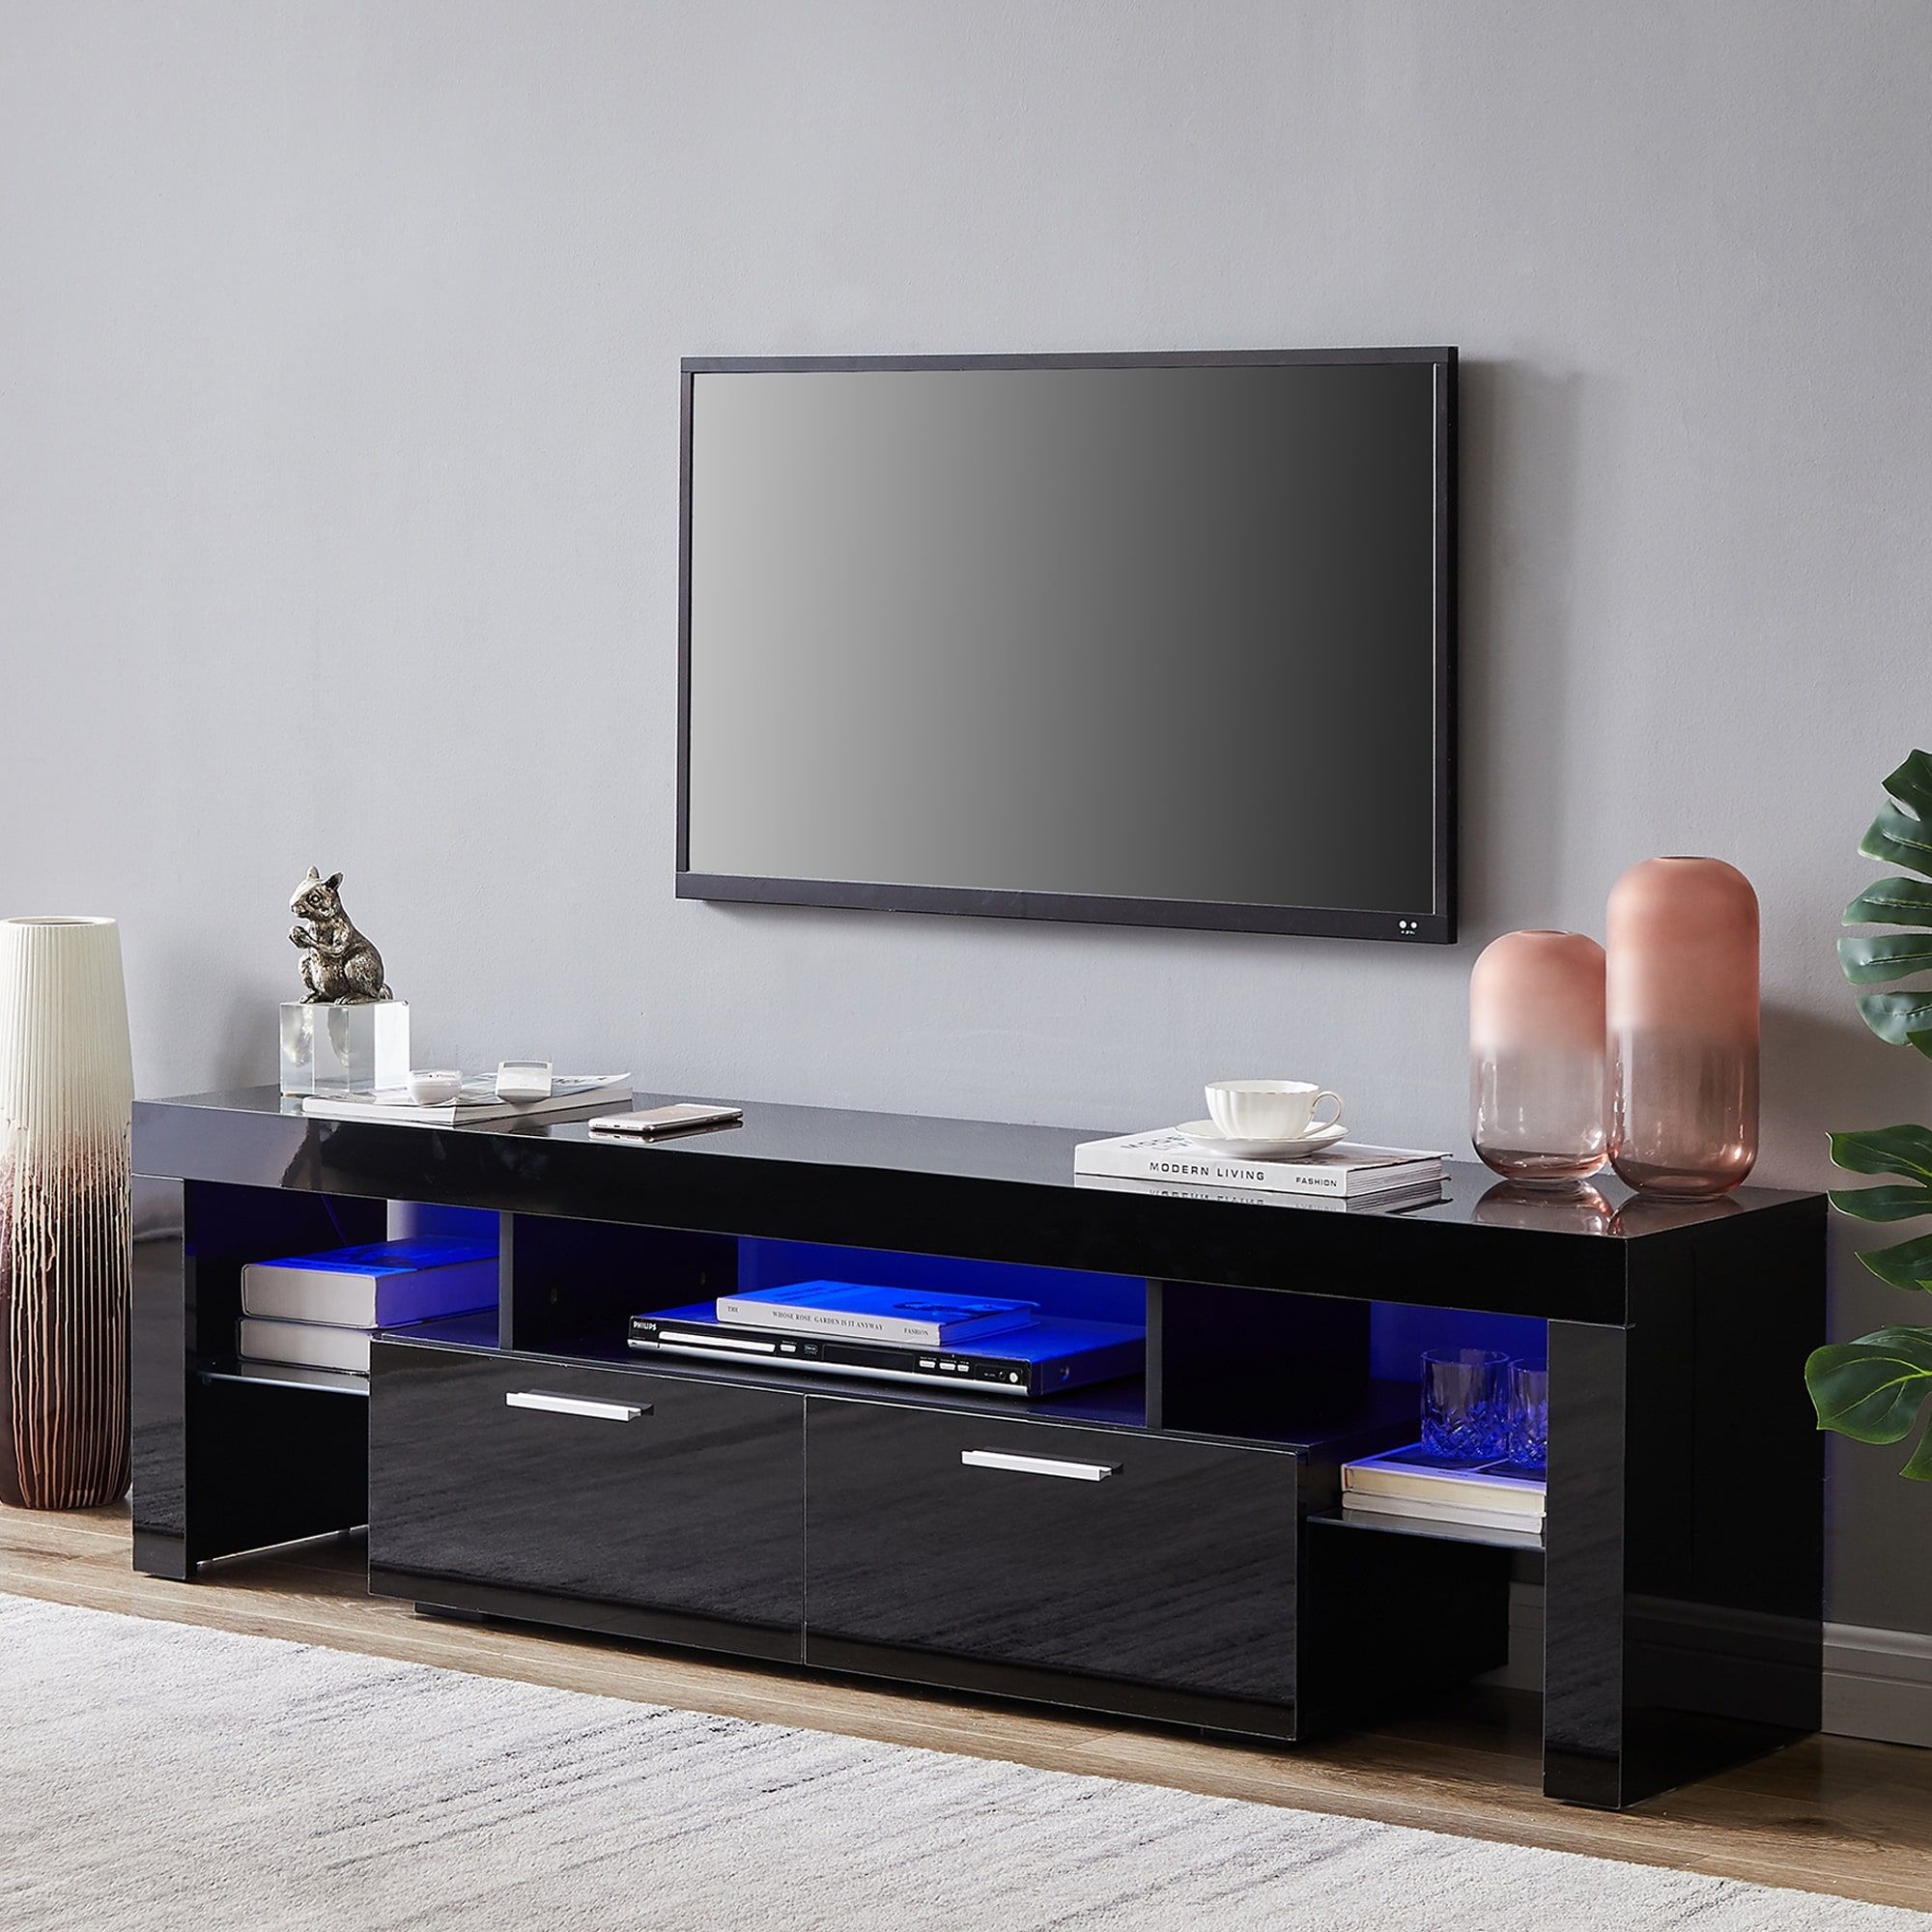 63 Inch Rgb Led Light High Glossy Tv Stand Cabinet With 2 Center Down Open  Tie Rod Big Storage Drawer And 2 Side Glass Shelf – Bed Bath & Beyond –  35473038 Throughout Rgb Tv Entertainment Centers (View 3 of 15)